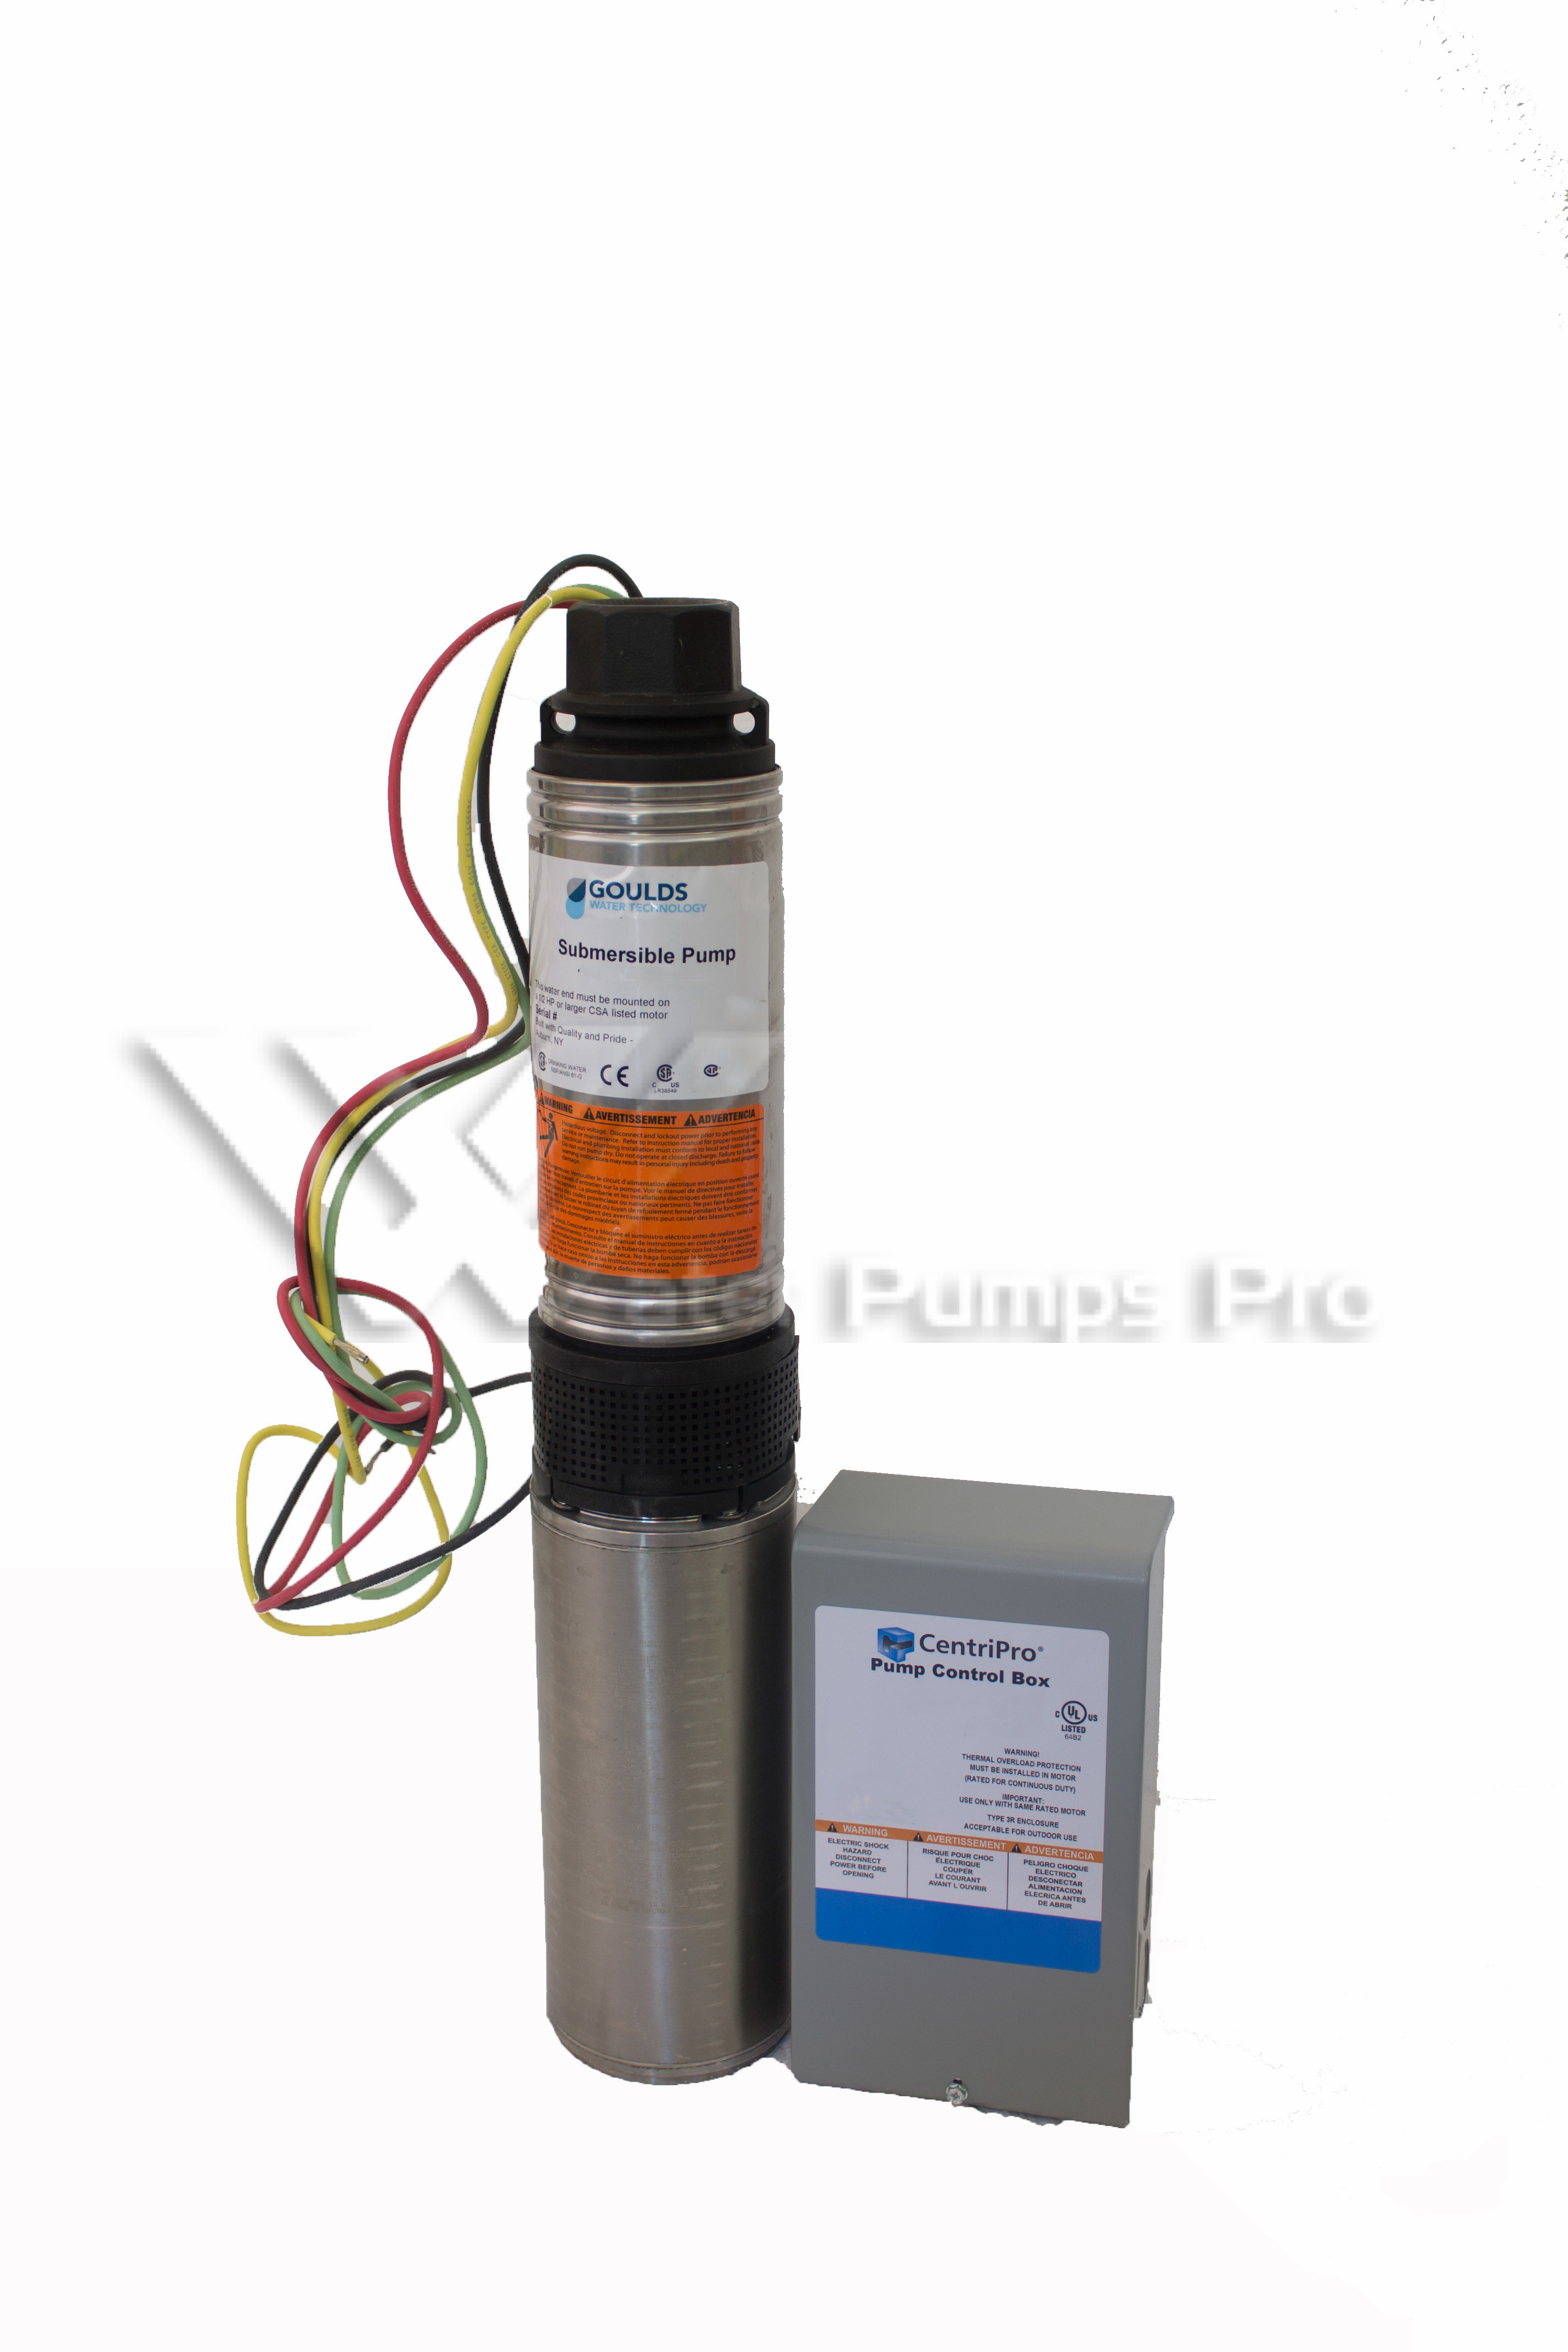 Goulds 10HS10412C Submersible Water Well Pump 1HP 230V 3Wire